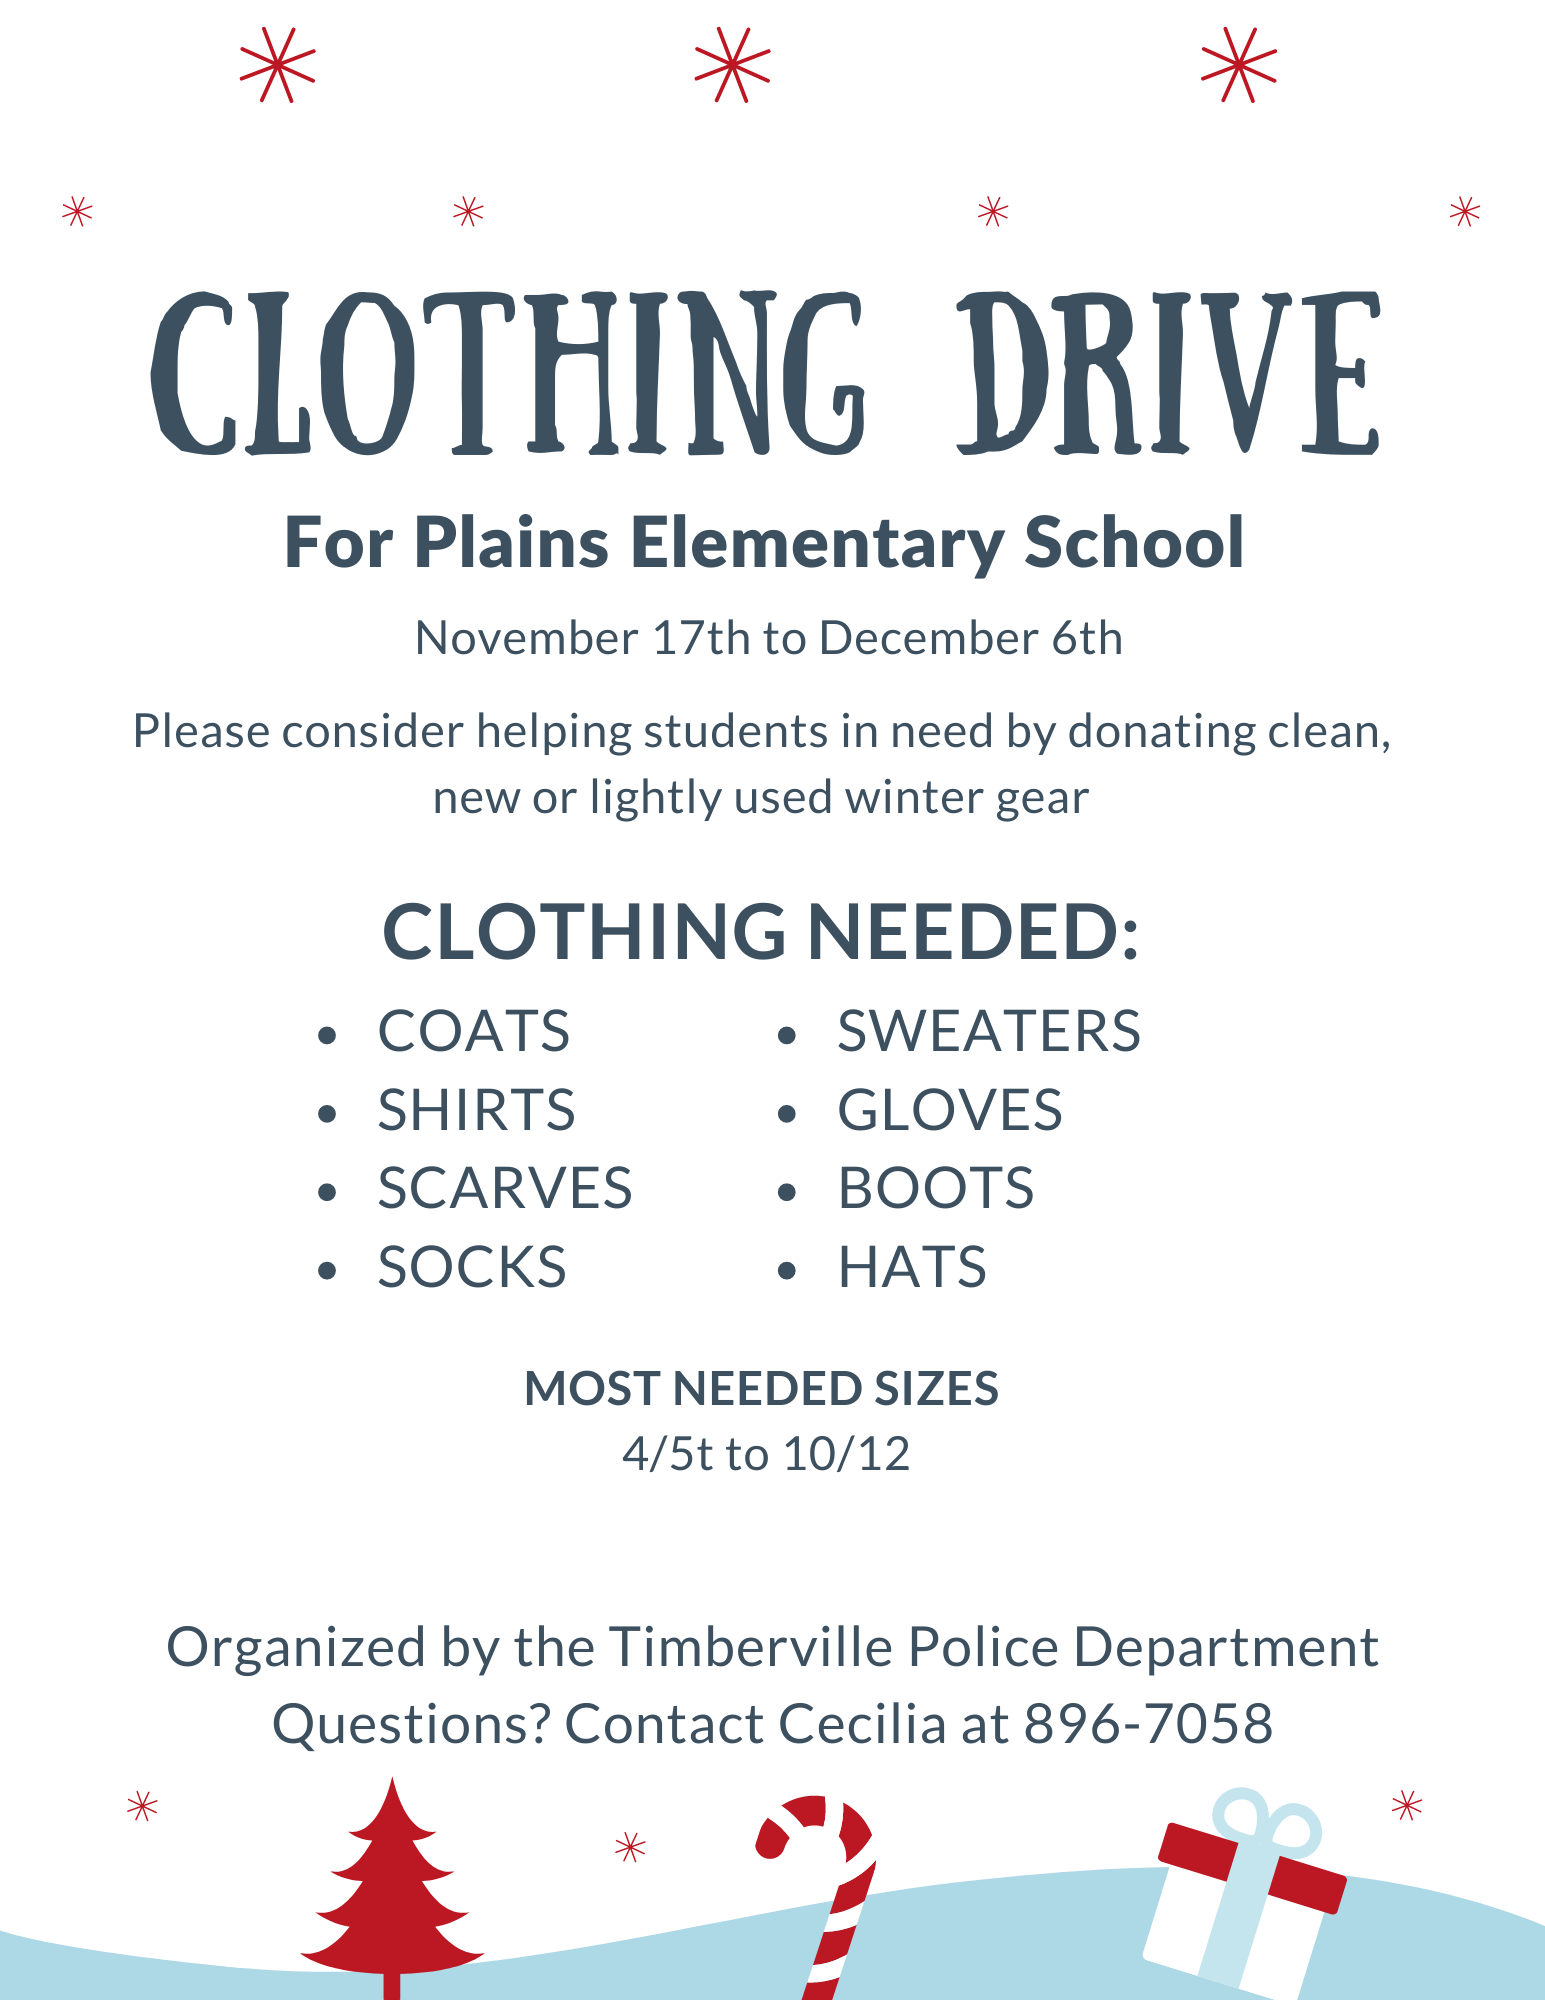 Clothing drive